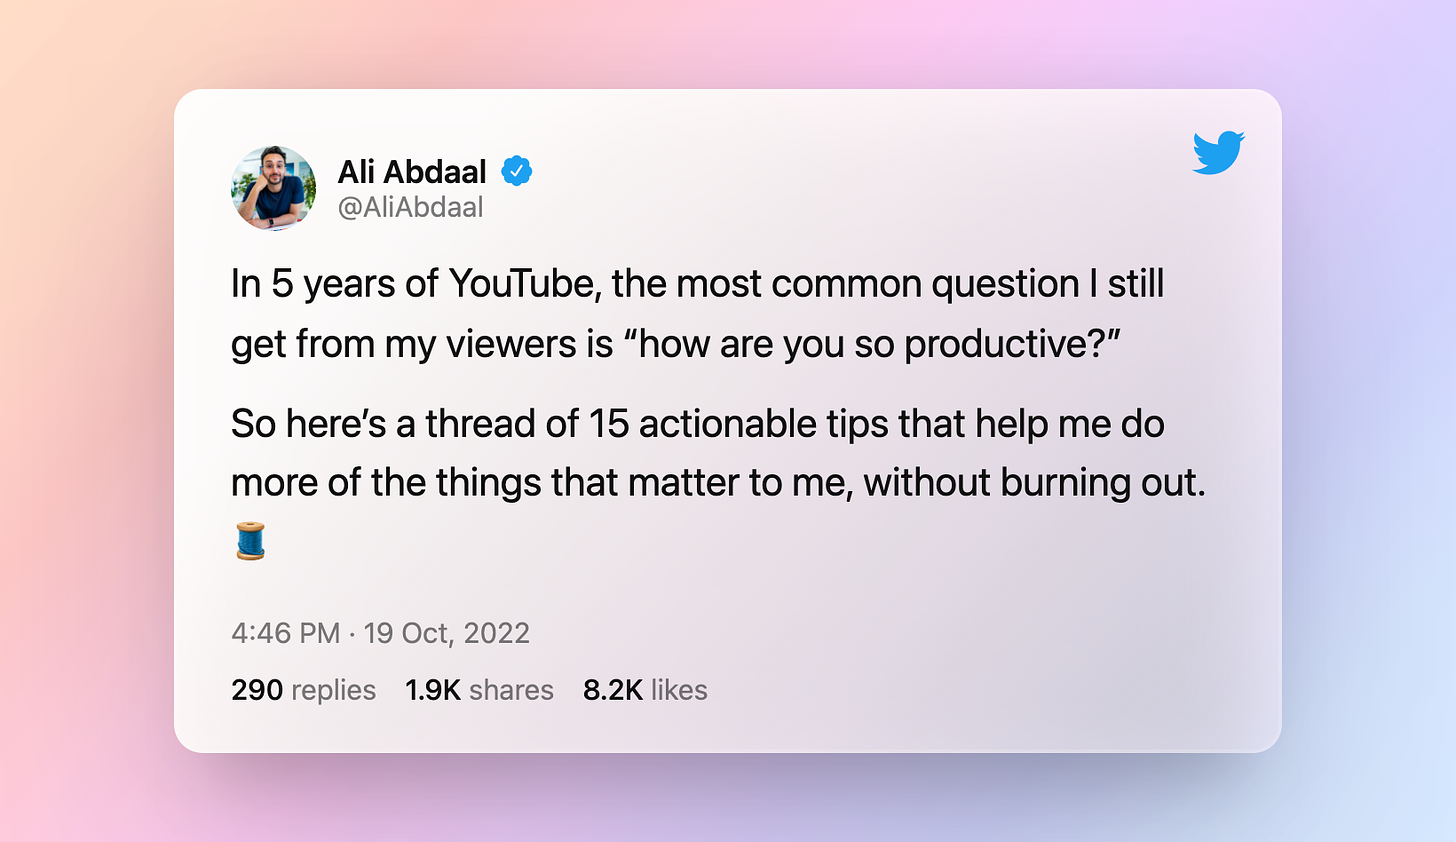 tweet by ali abdall that reads: In 5 years of YouTube, the most common question I still get from my viewers is “how are you so productive?”  So here’s a thread of 15 actionable tips that help me do more of the things that matter to me, without burning out.